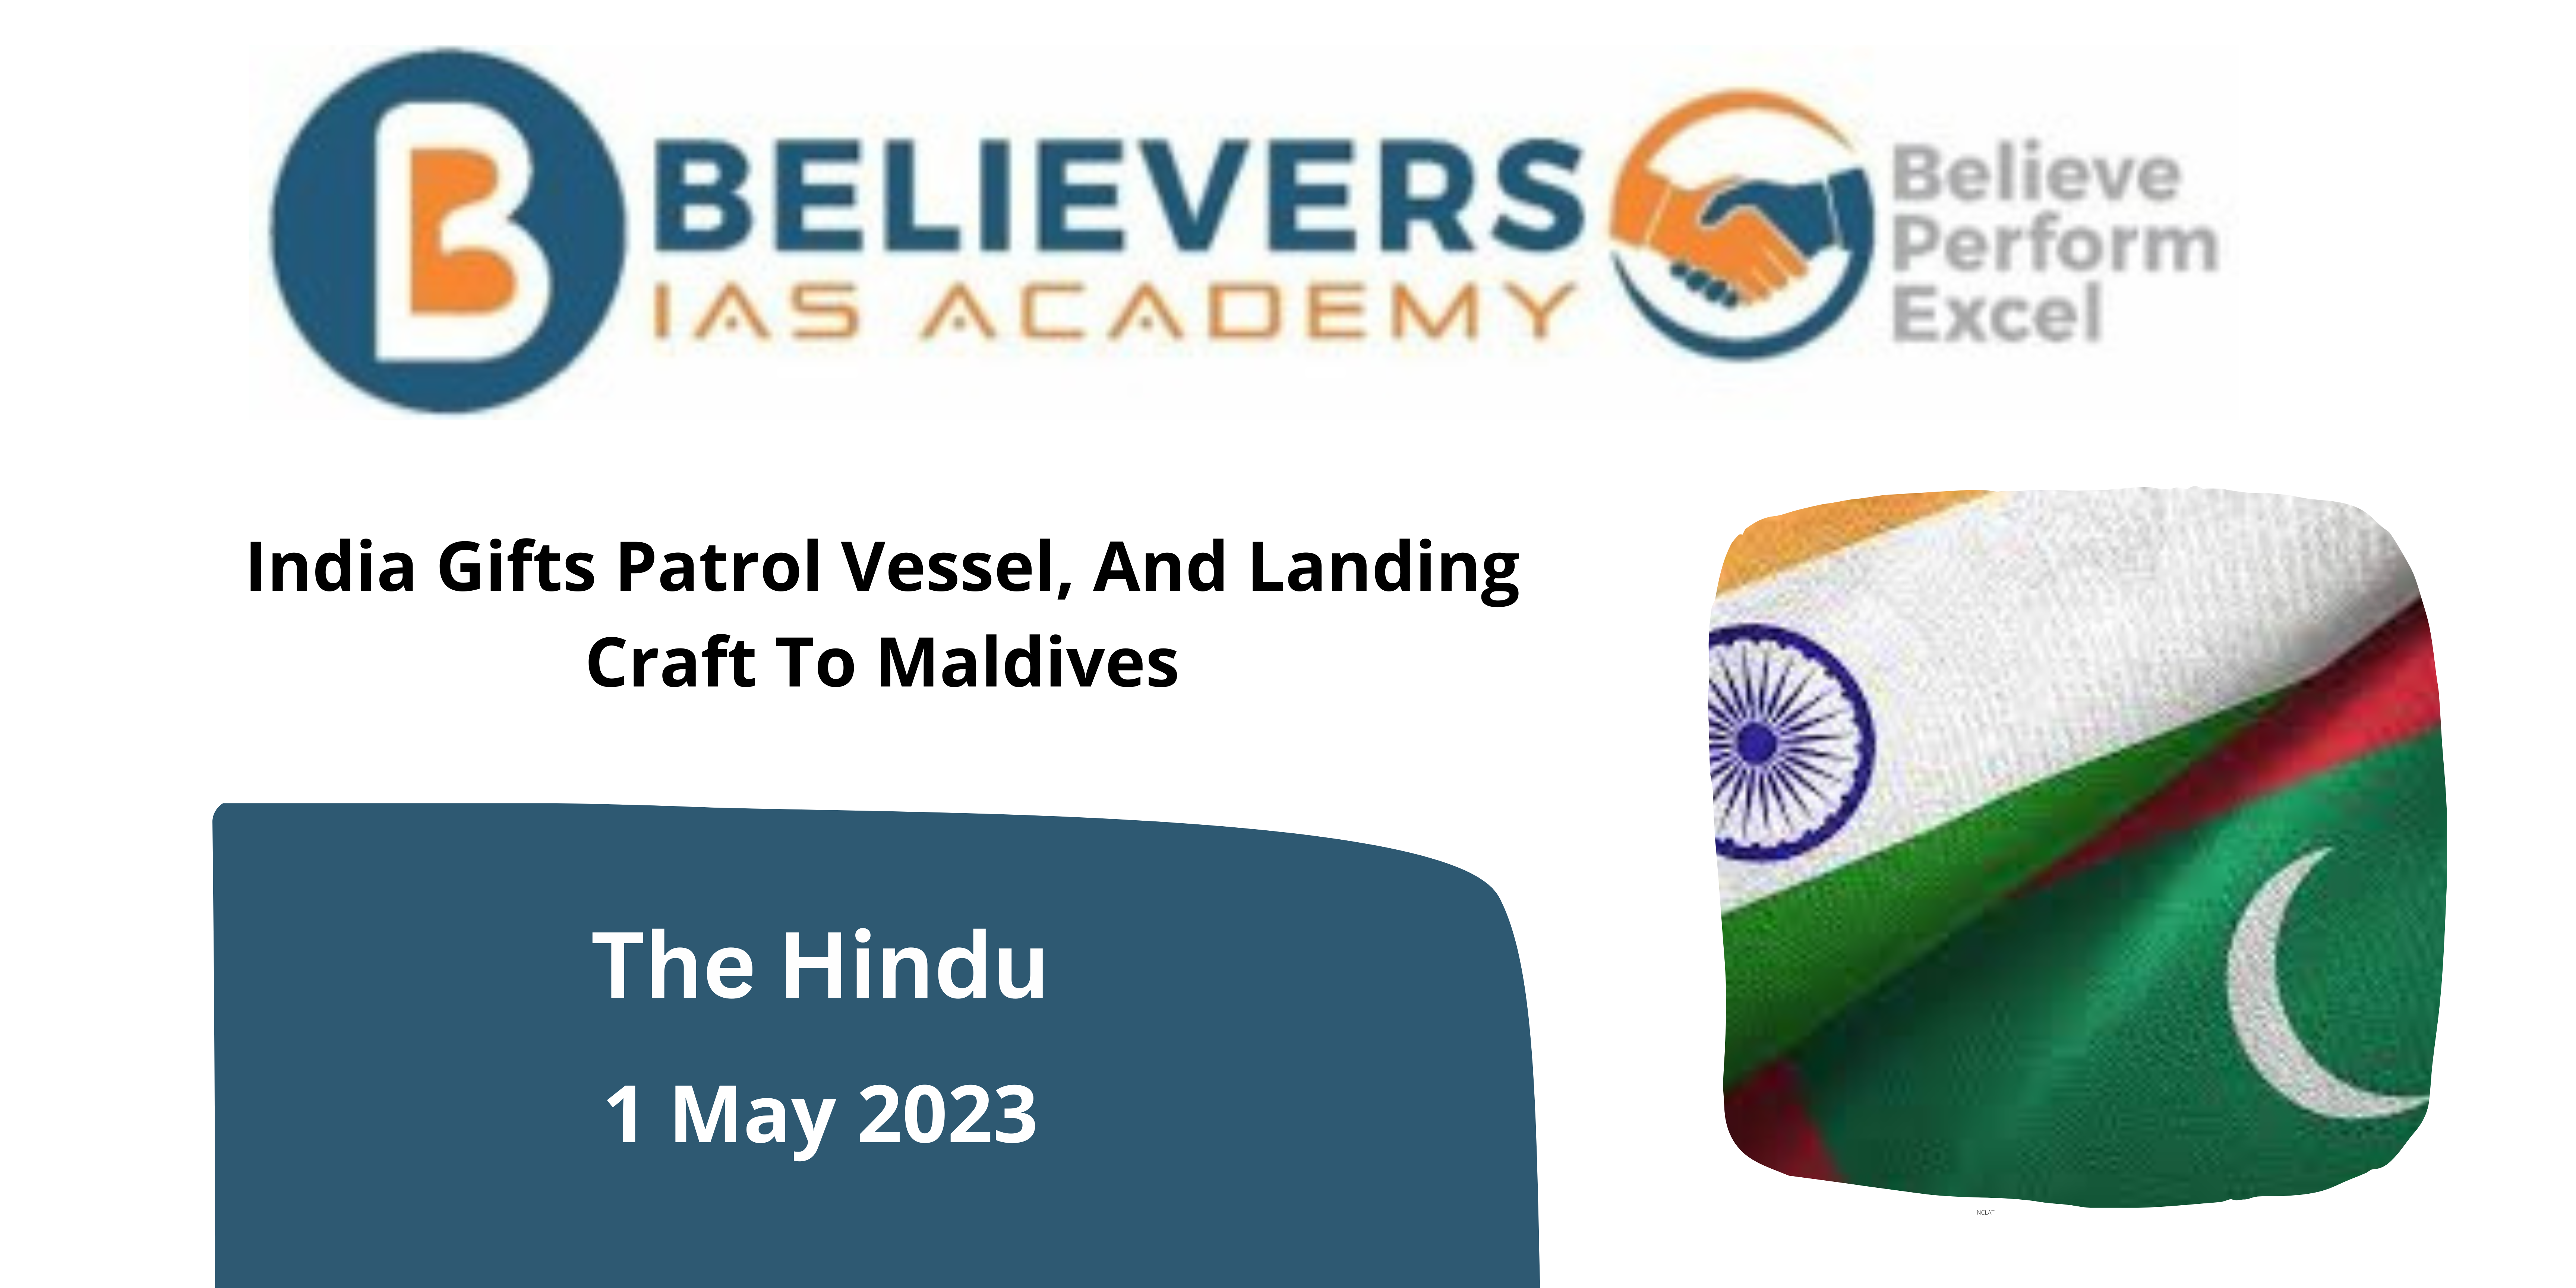 India Gifts Patrol Vessel, And Landing Craft To Maldives